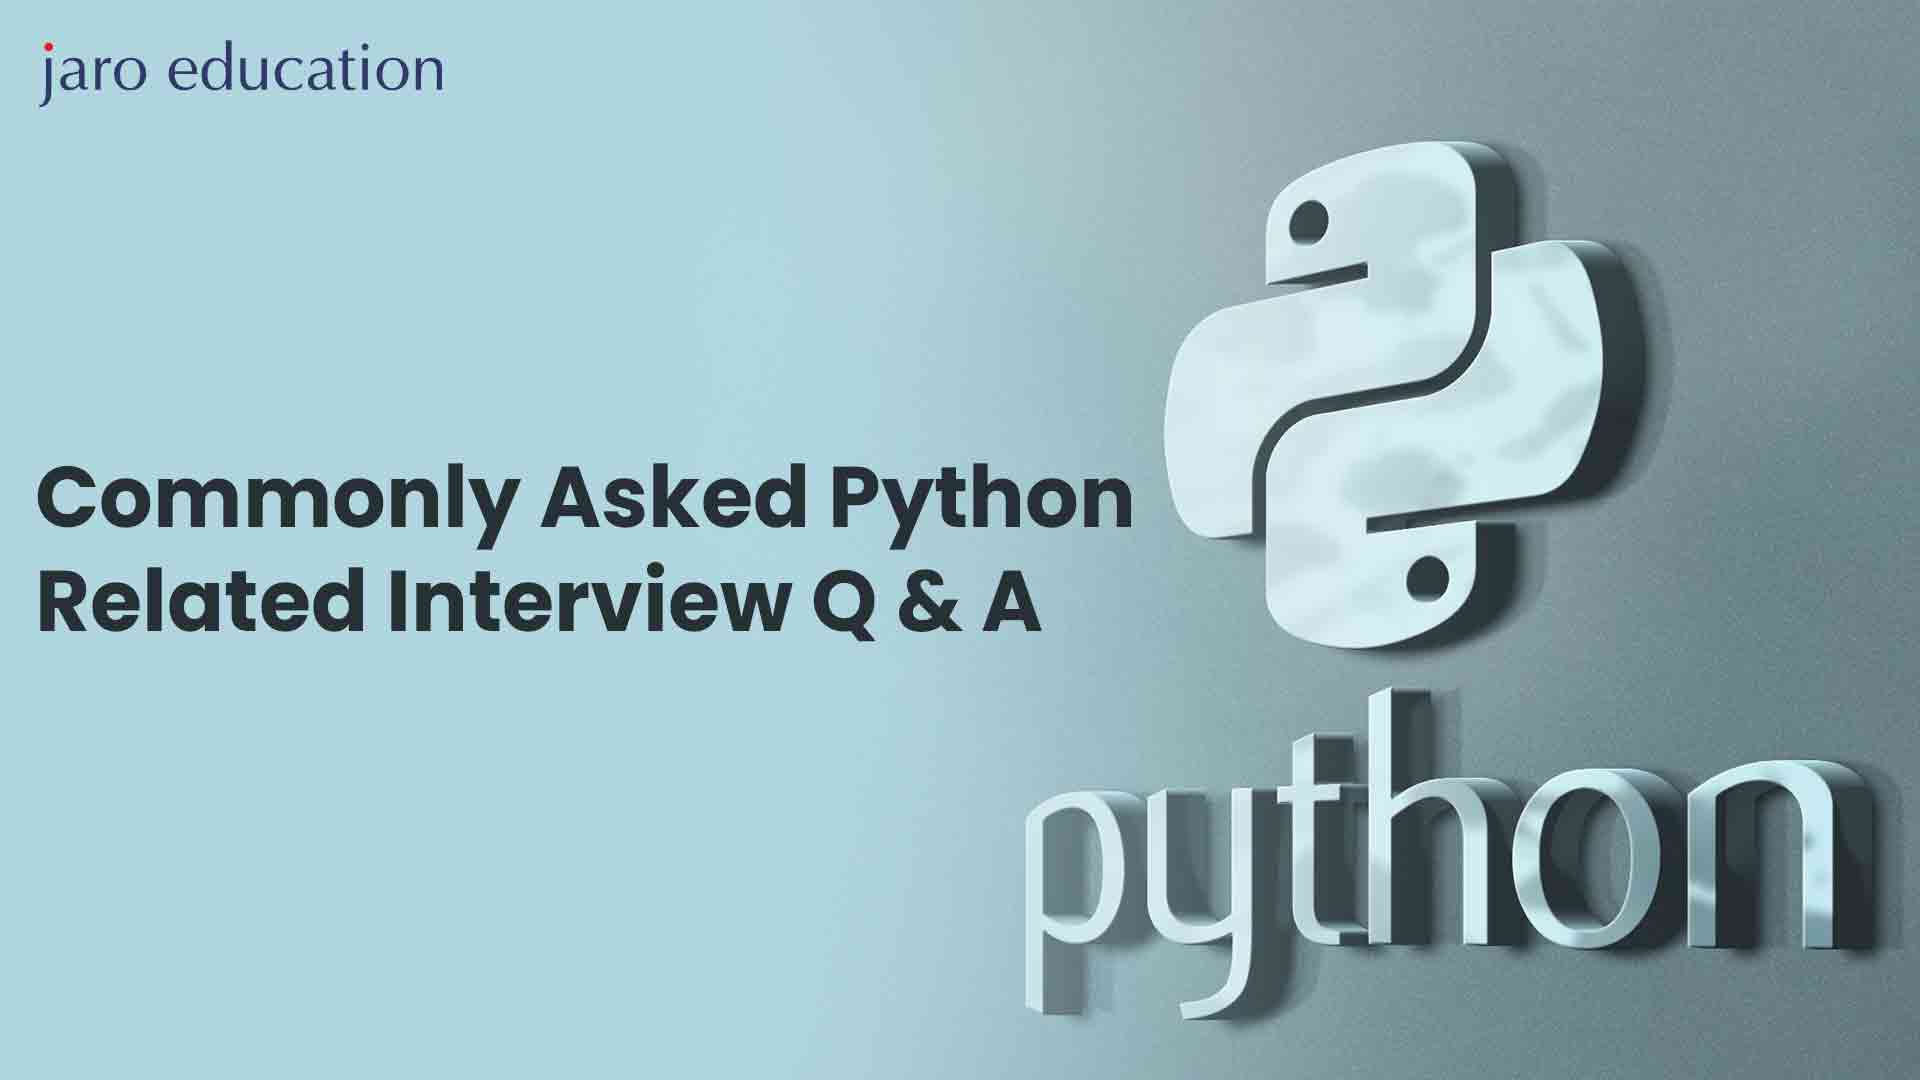 Commonly Asked Python Related Interview Q & A